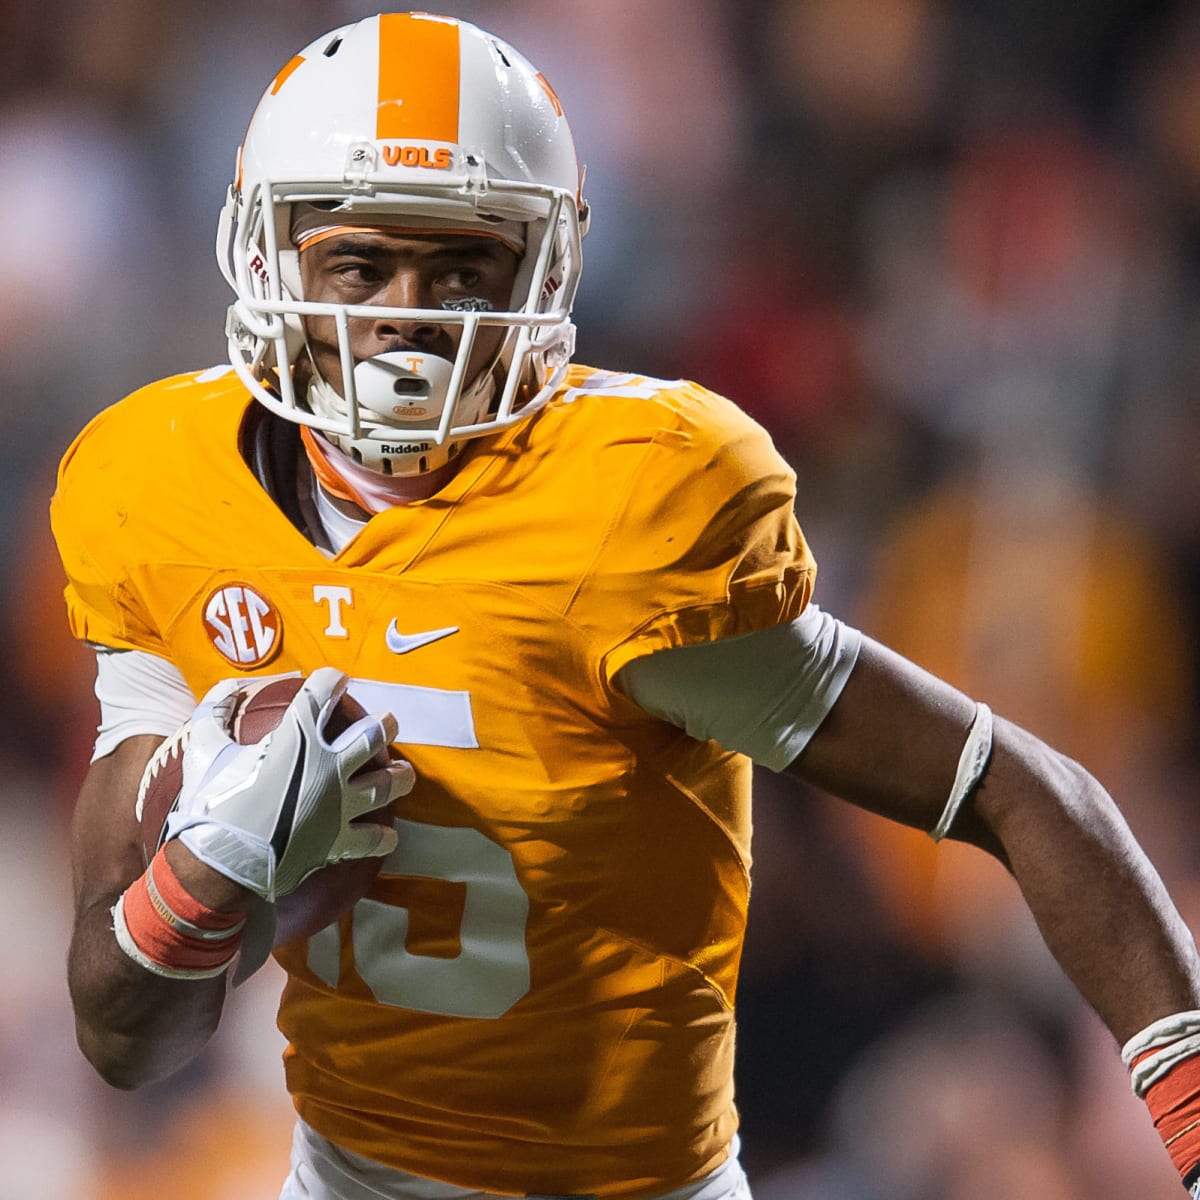 Watch: VFL Jauan Jennings Punched By Jaguars Defender, Leads To